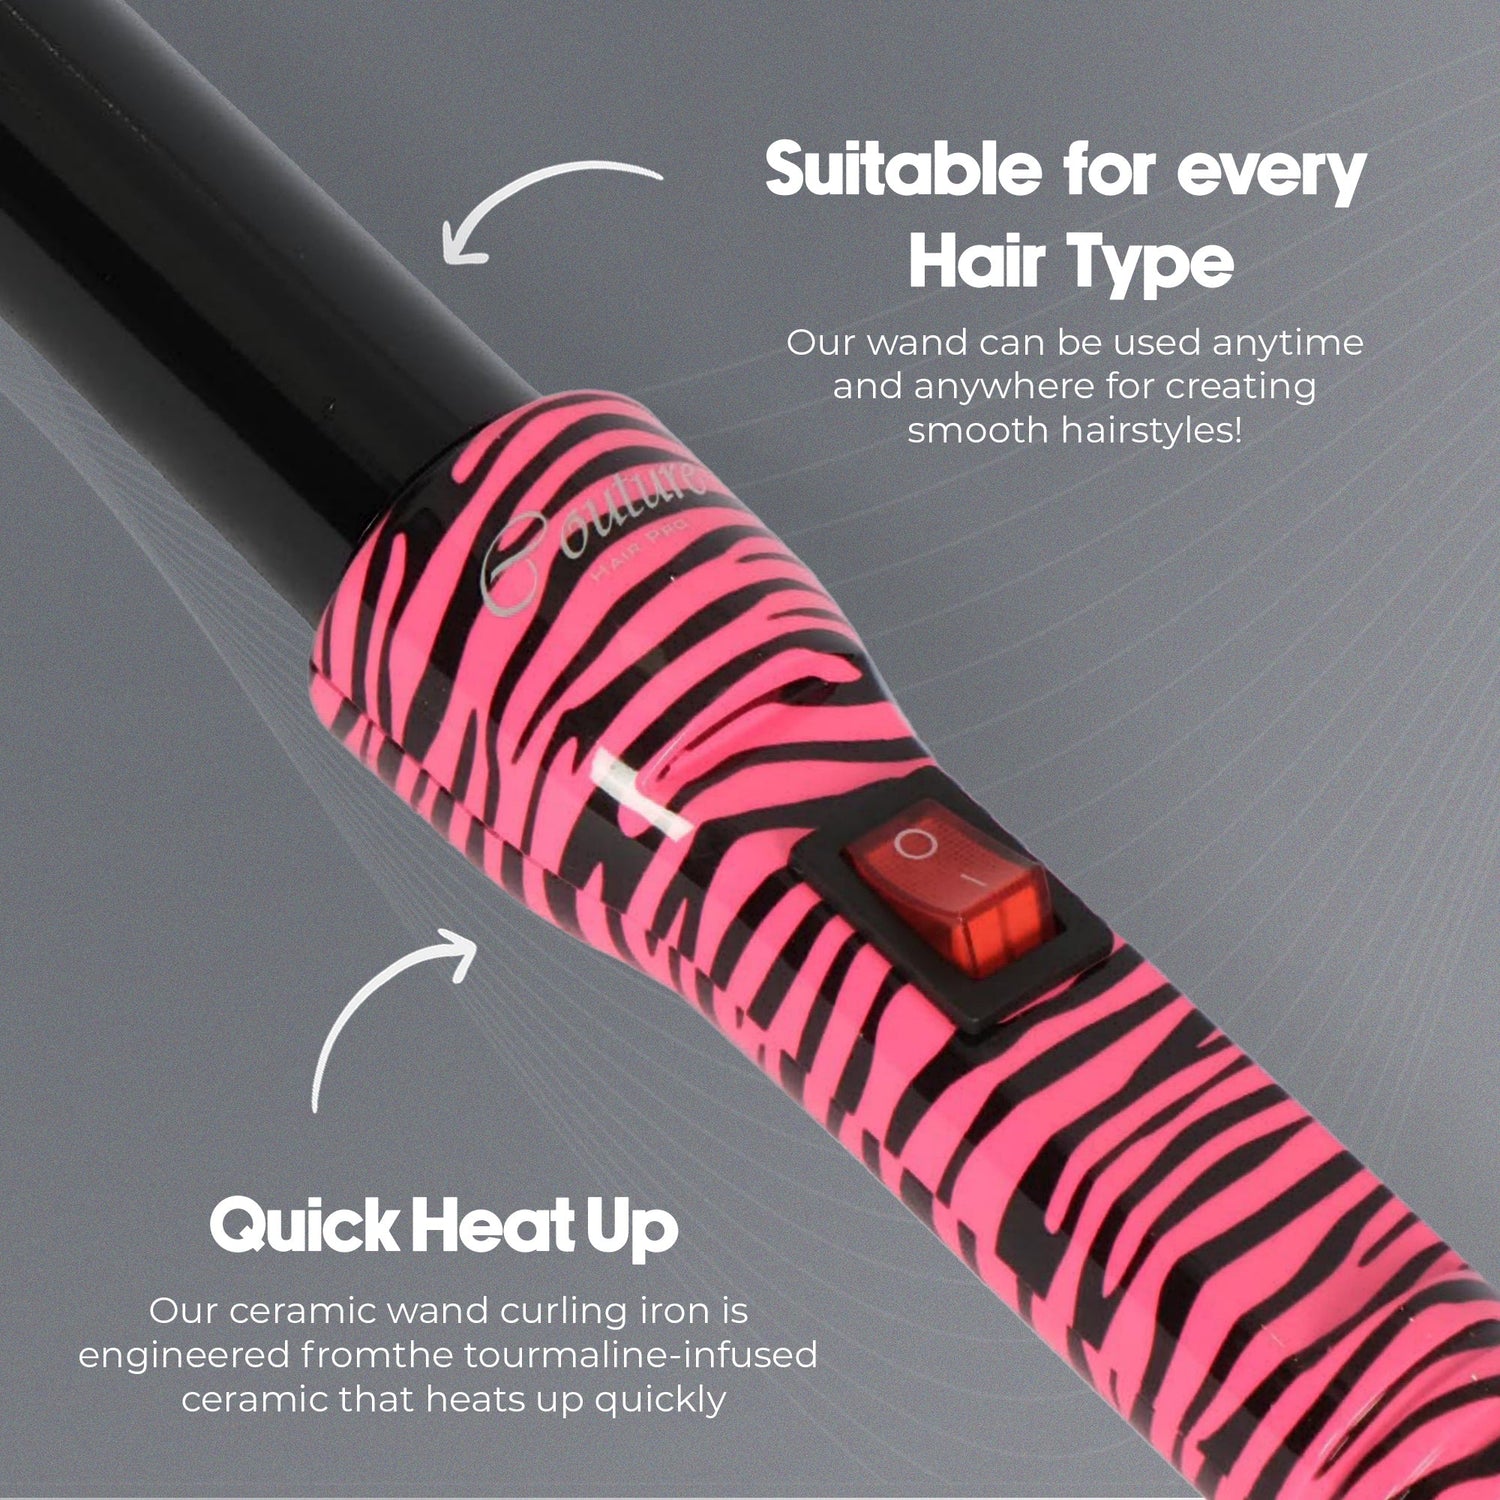 Couture Hair Pro Hair Curler Classic 25 MM - Pink Zebra - Couture Hair Pro